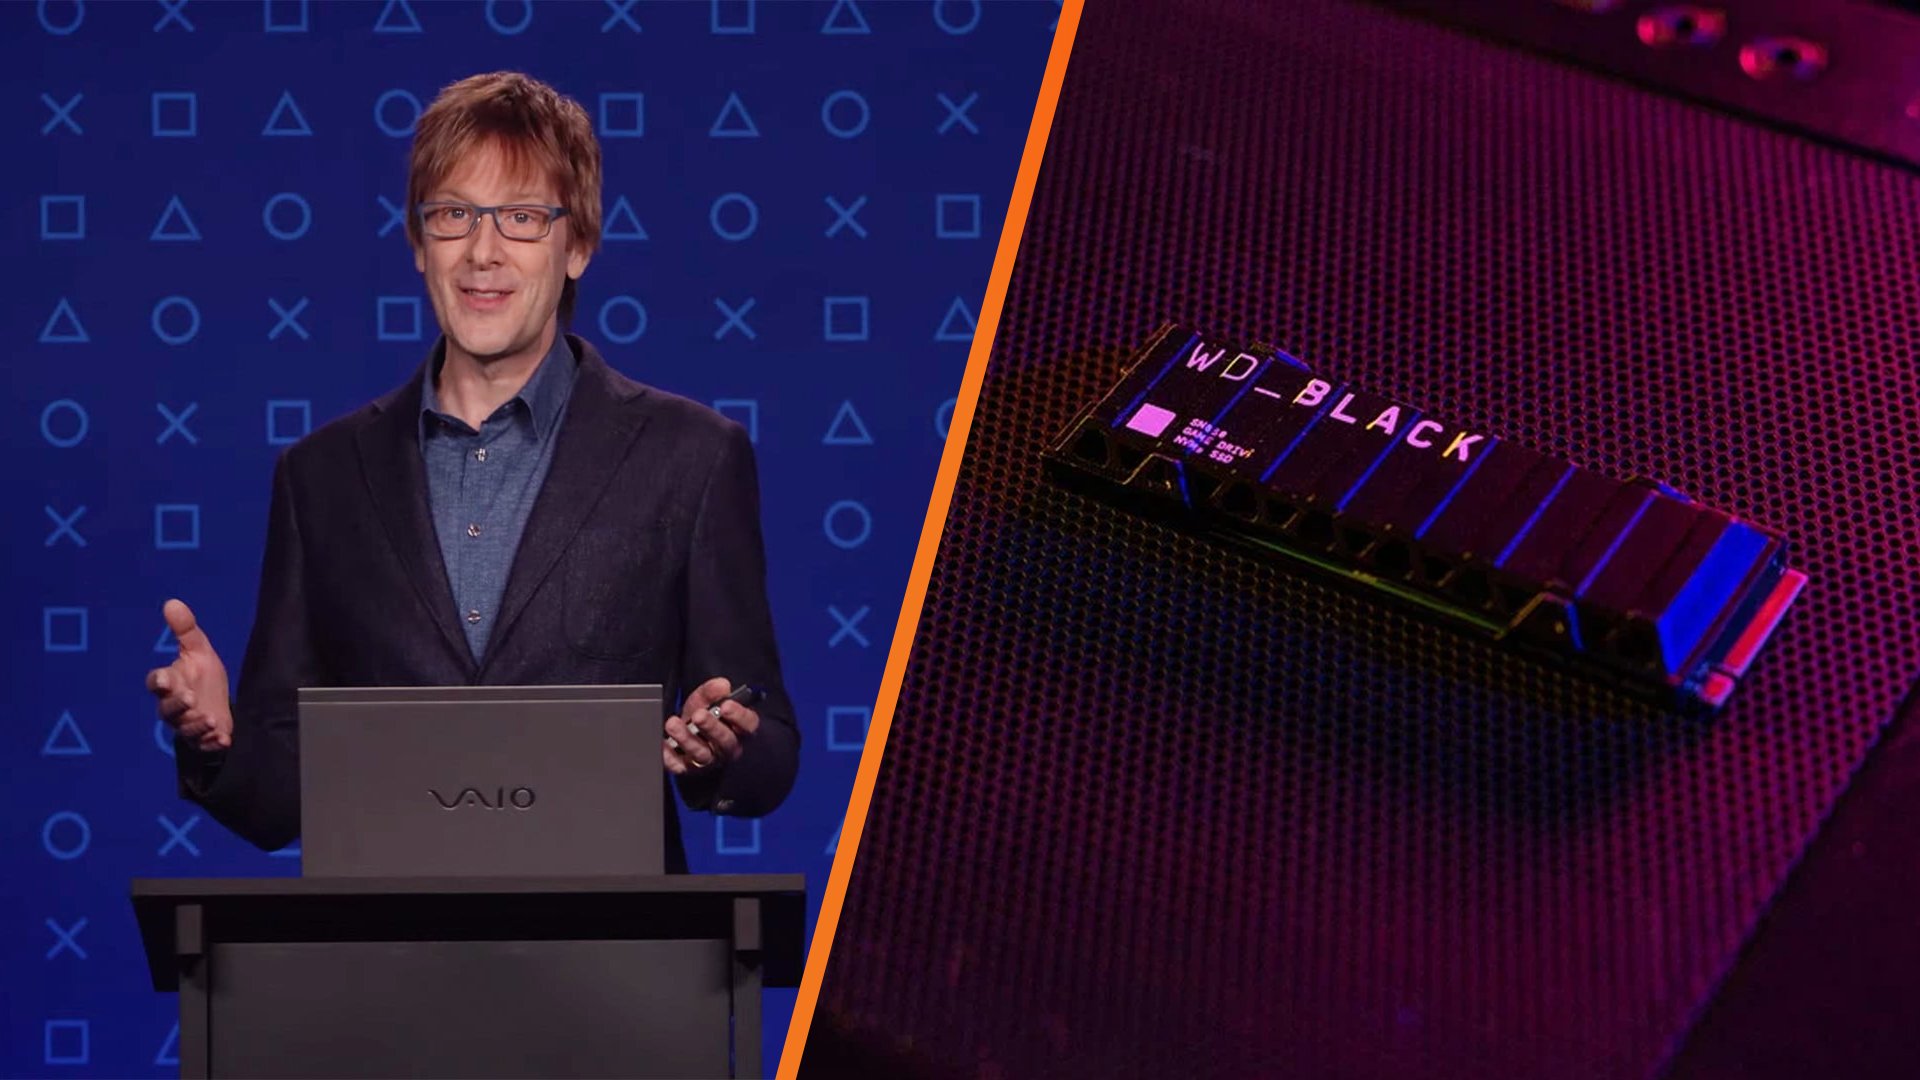 PS5 architect Mark Cerny has revealed his SSD of choice - Video Games Chronicle